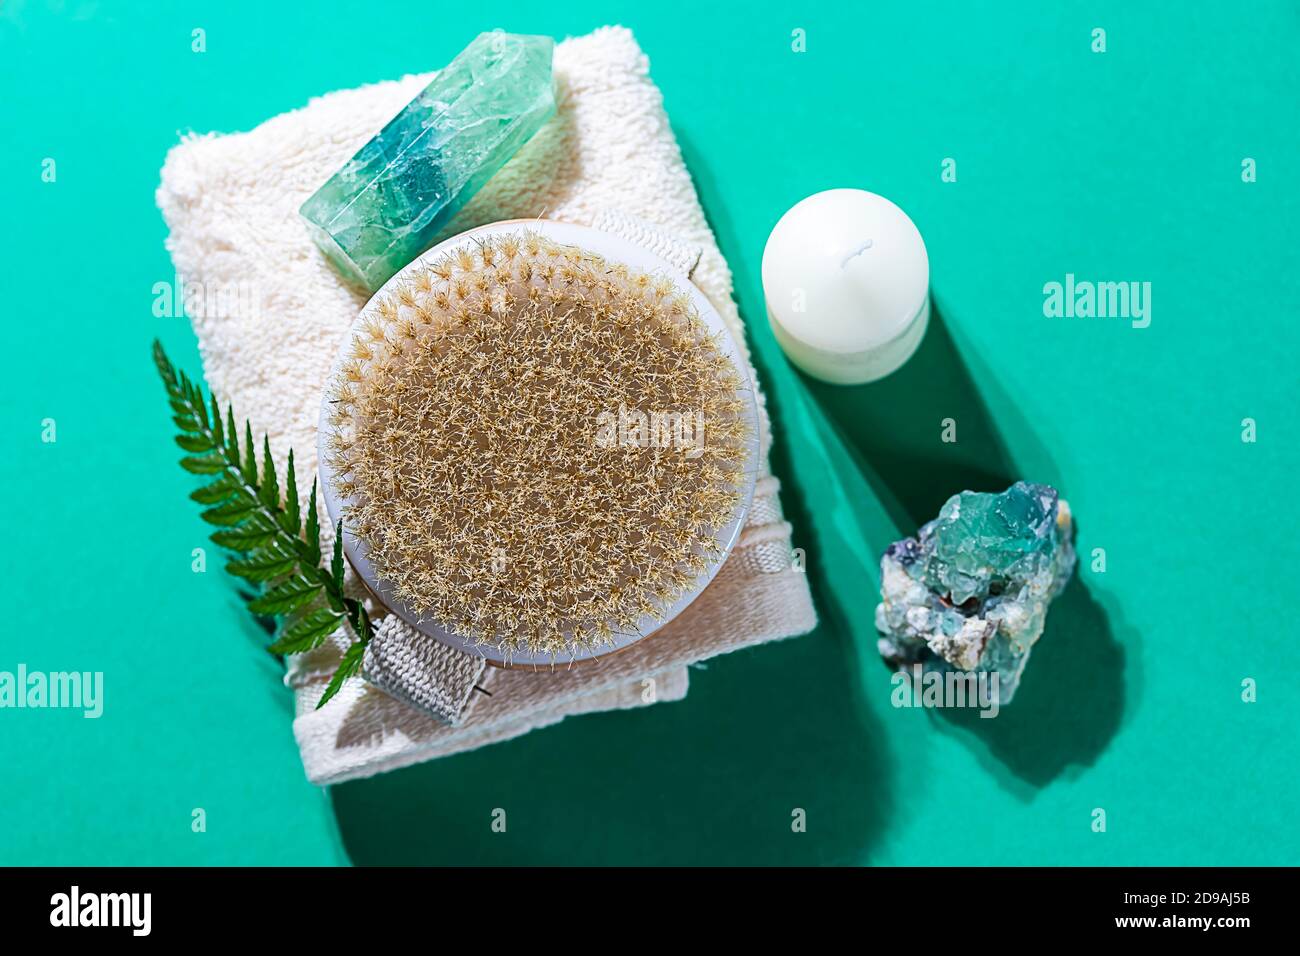 Natural organic wooden body massage brush, crystals, towel, fern leaves with natural sunlight. Home Spa Therapy. Stock Photo